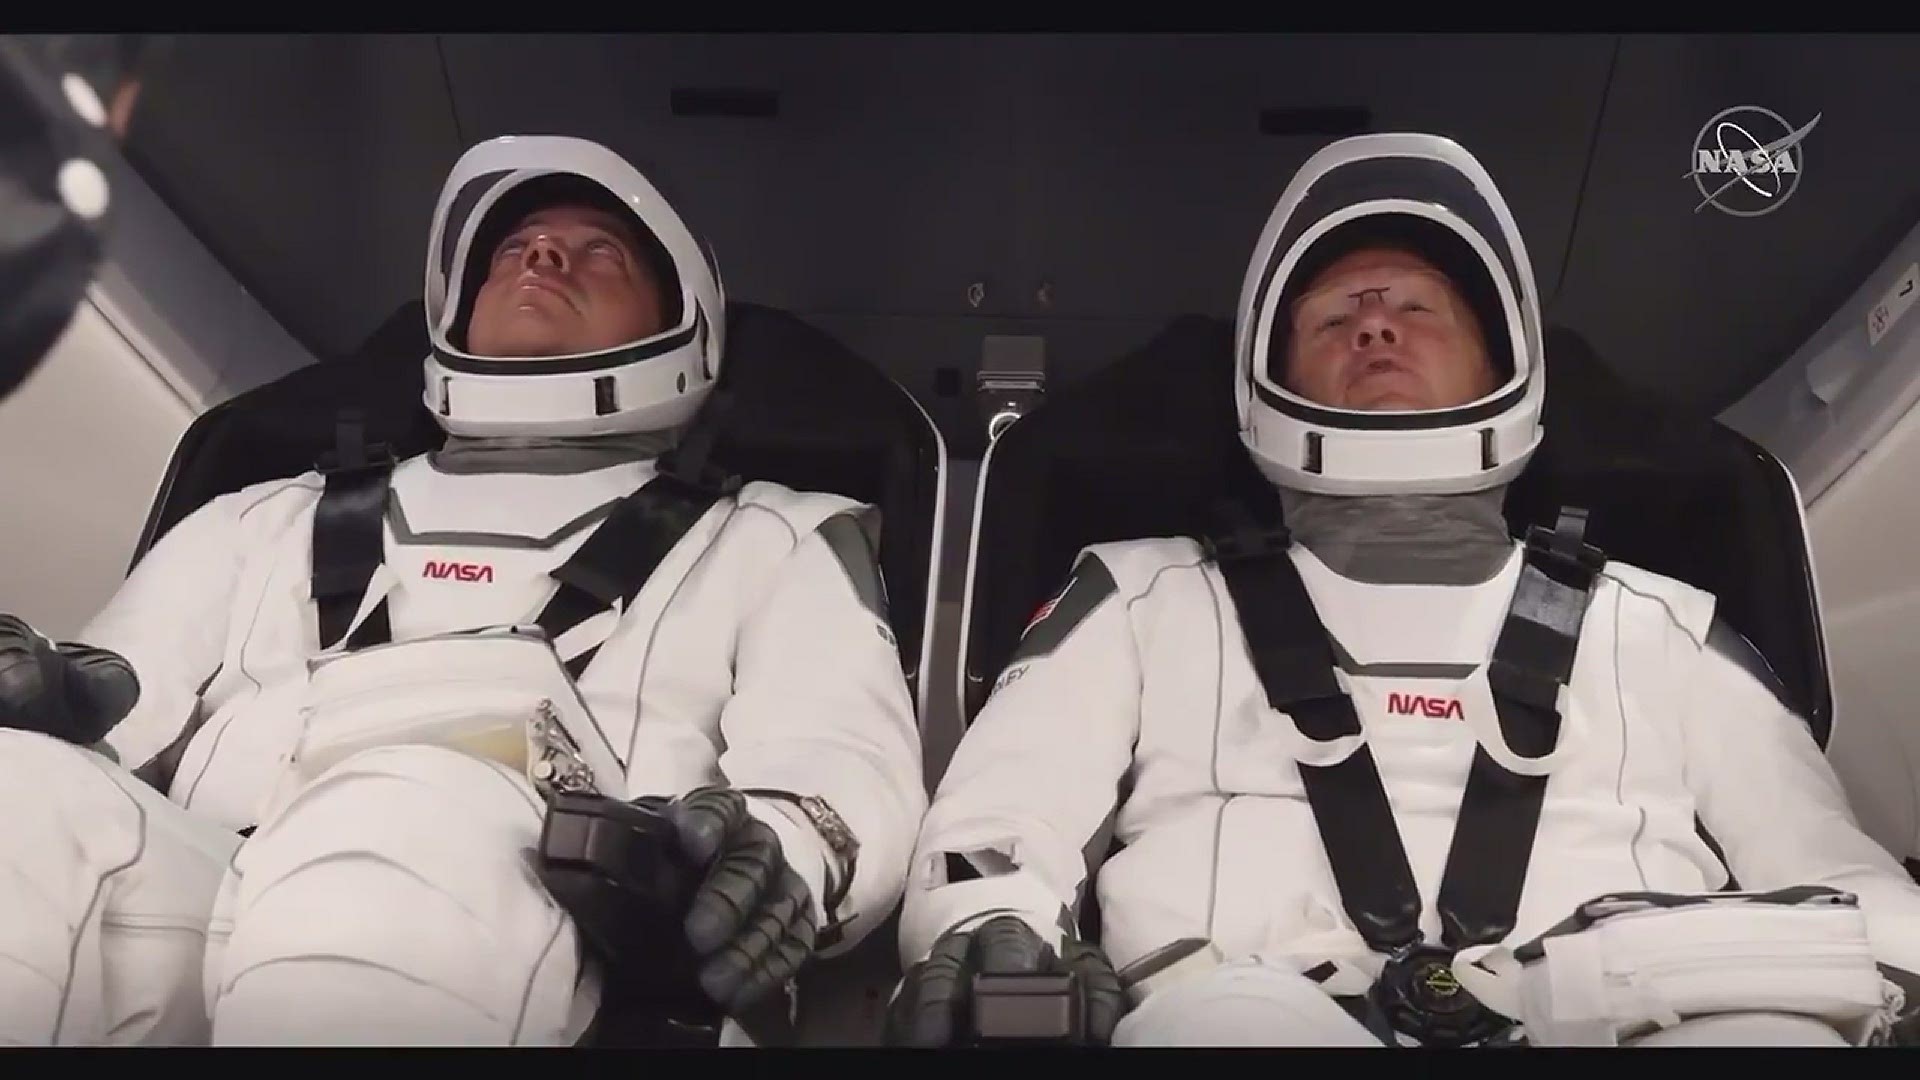 NASA: The seats in Crew Dragon are in the launch position, tilted back so that astronauts Behnken and Hurley can work with the SpaceX touch screens and controls.